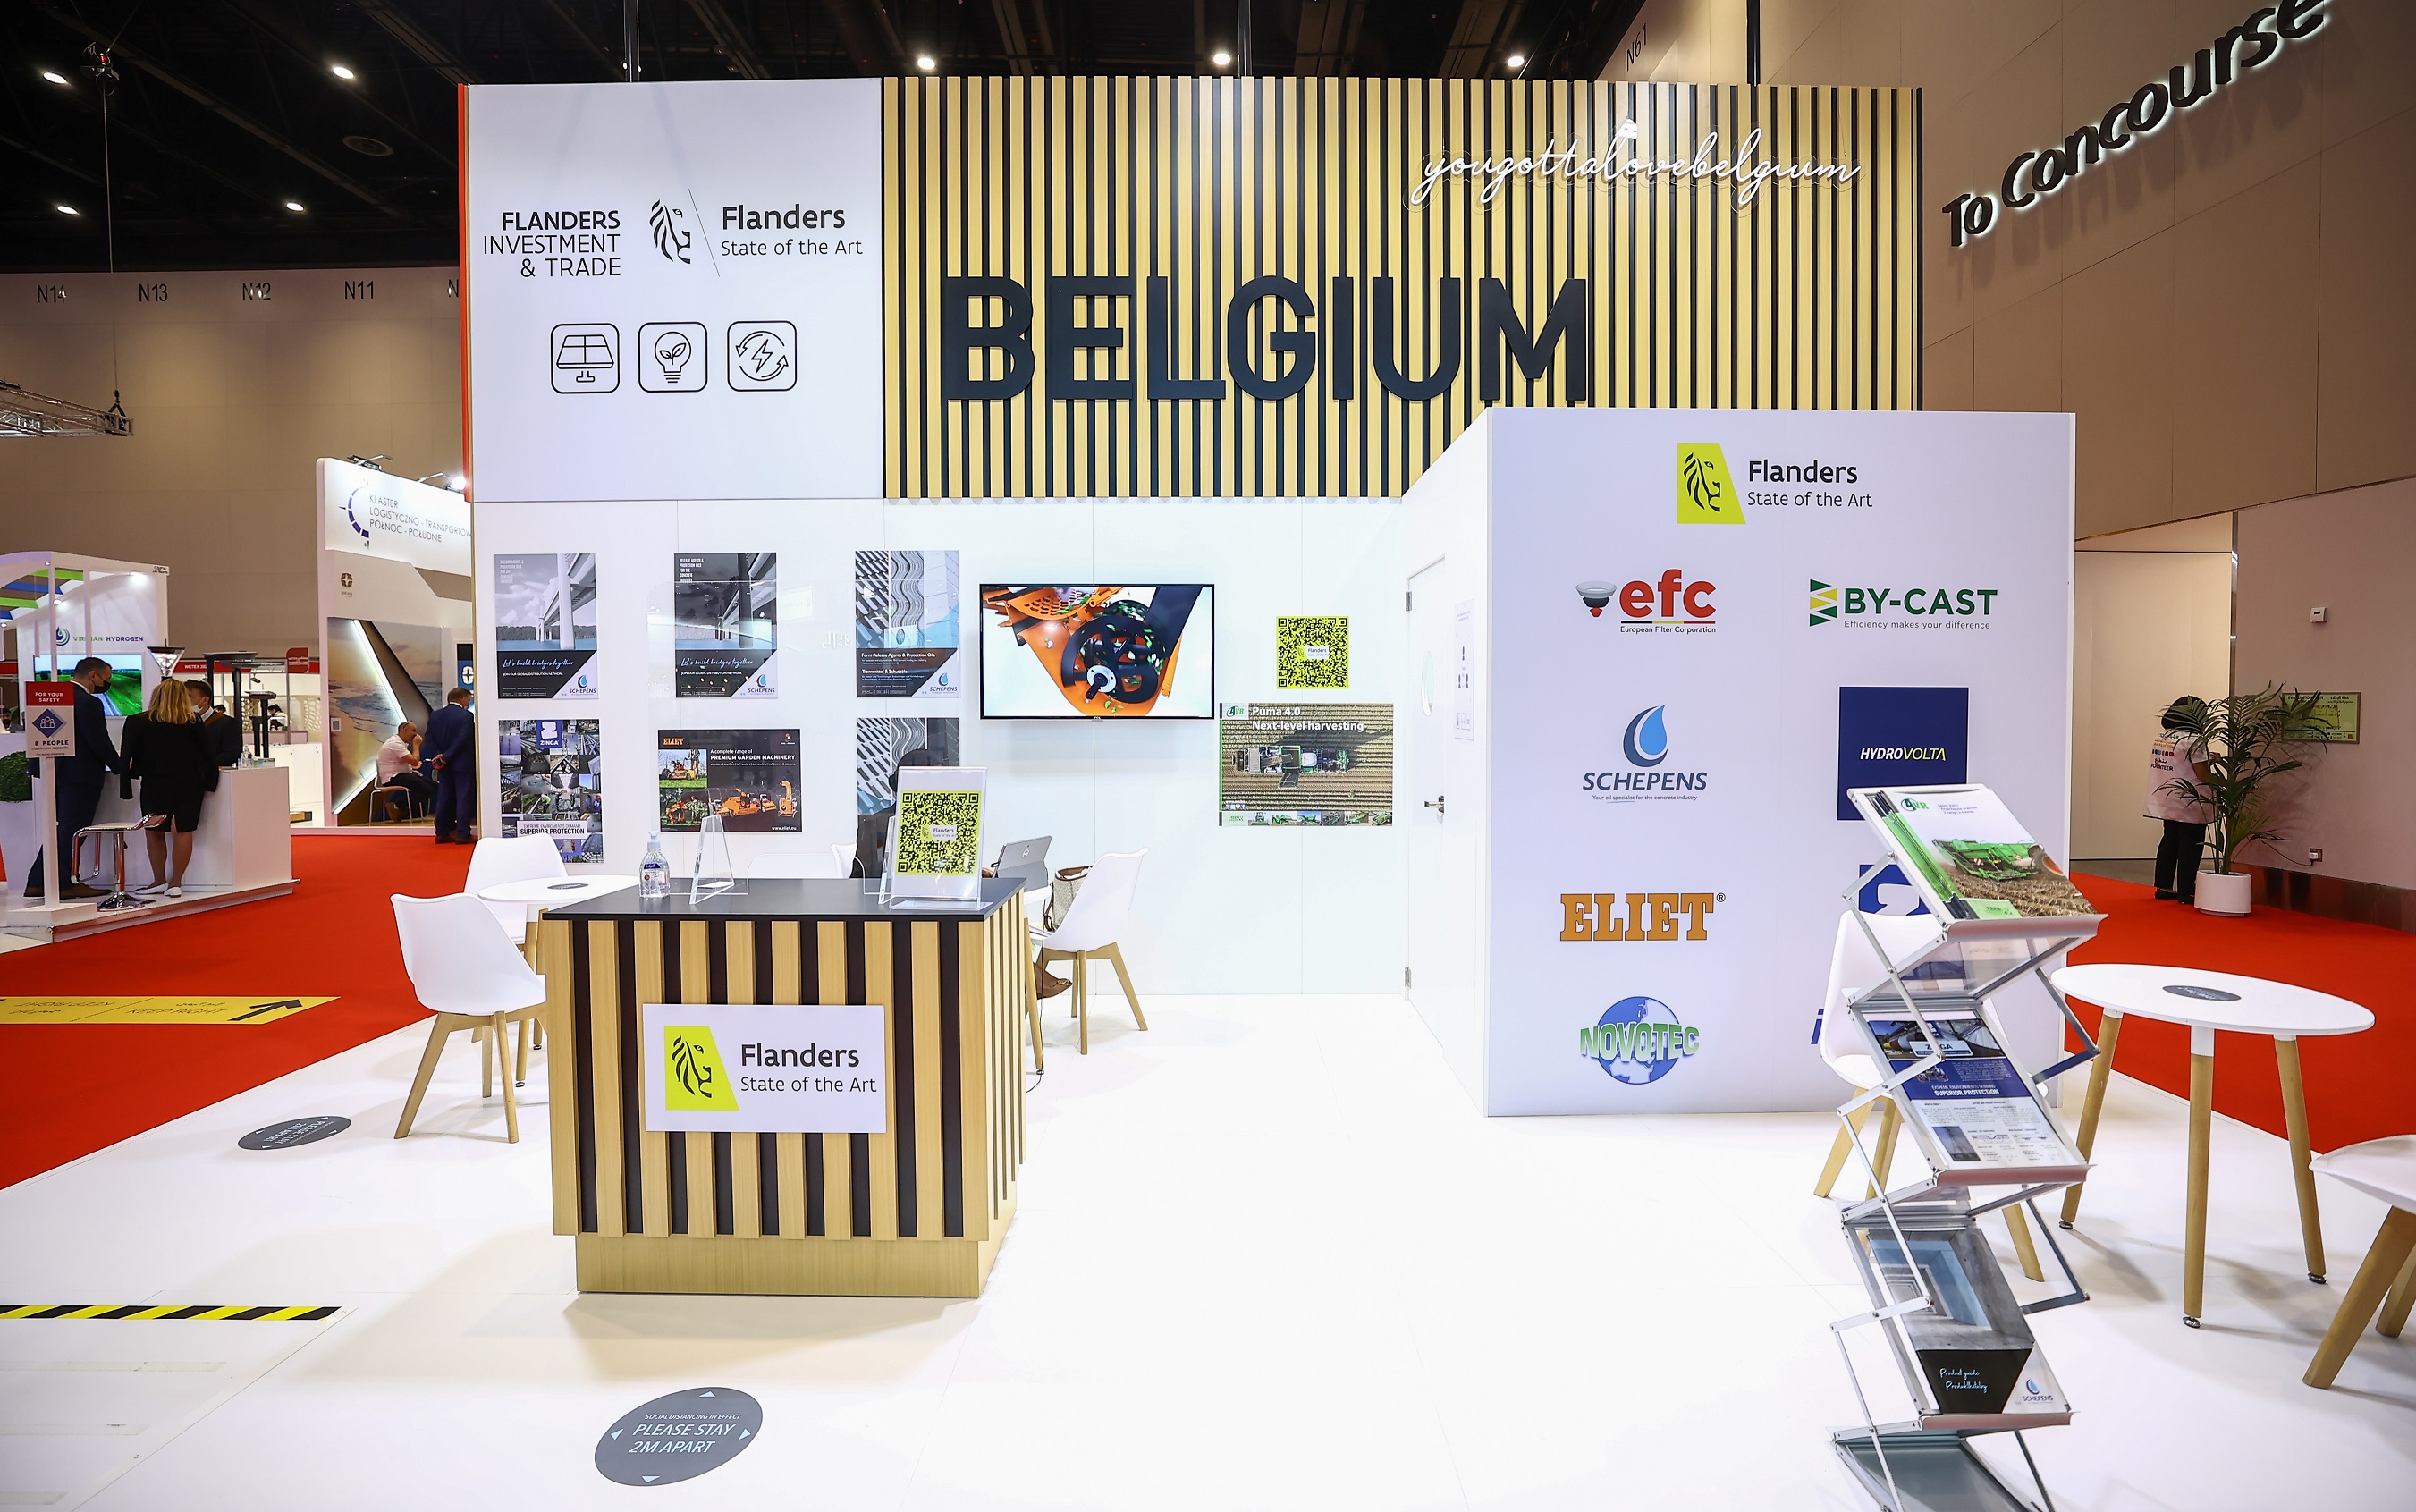 Belgian companies showcase their latest technologies in energy and water during their participation in WETEX and Dubai Solar Show 2022